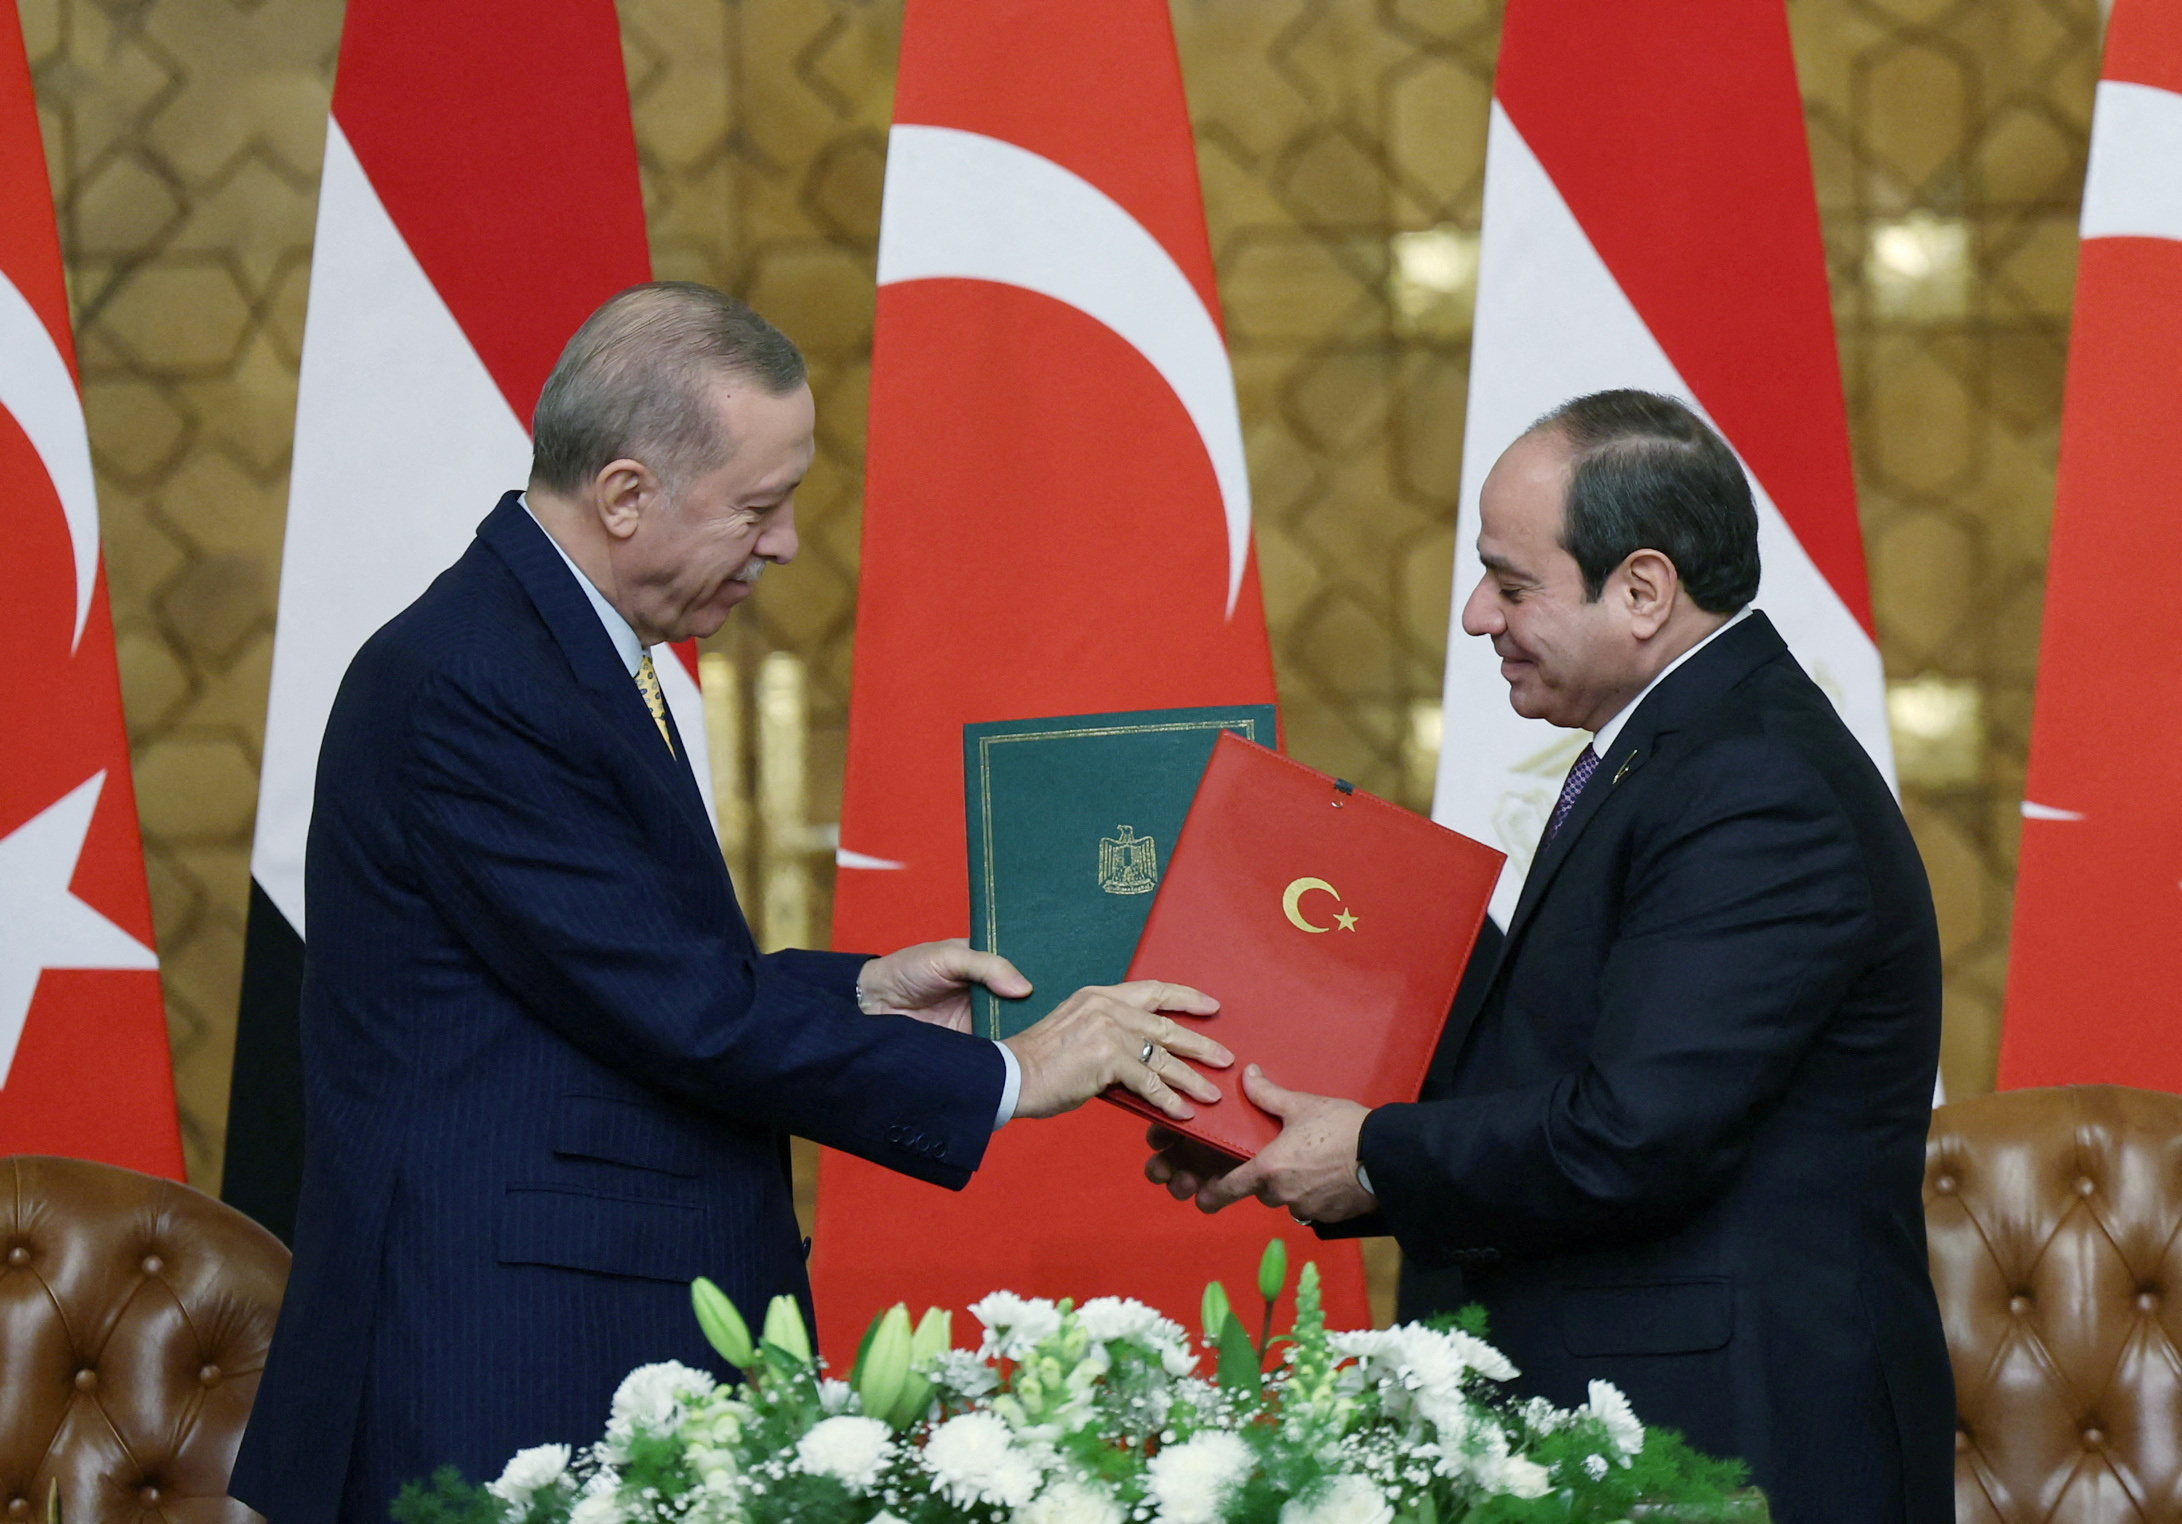 Turkey and Egypt bury the hatchet, marking the end of the emergence of a third axis in the Middle East